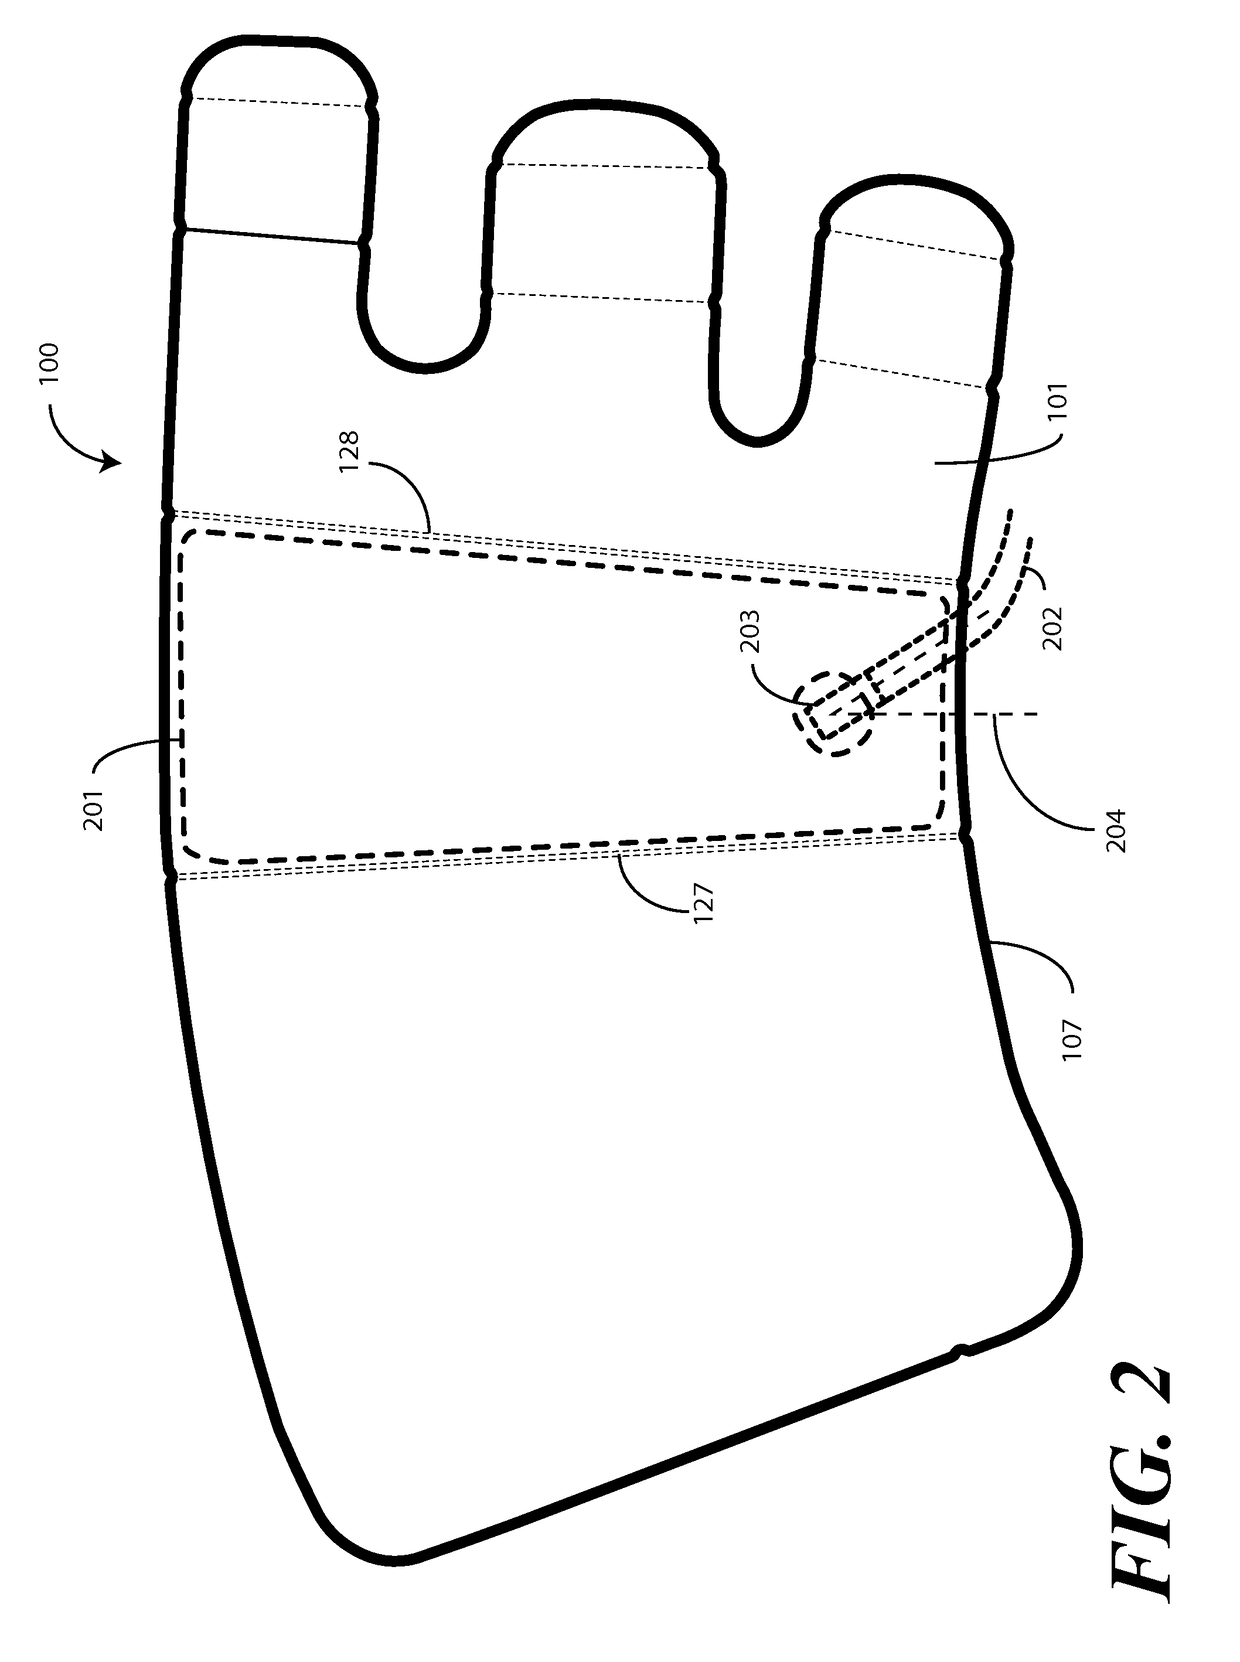 Compression device with sizing indicia